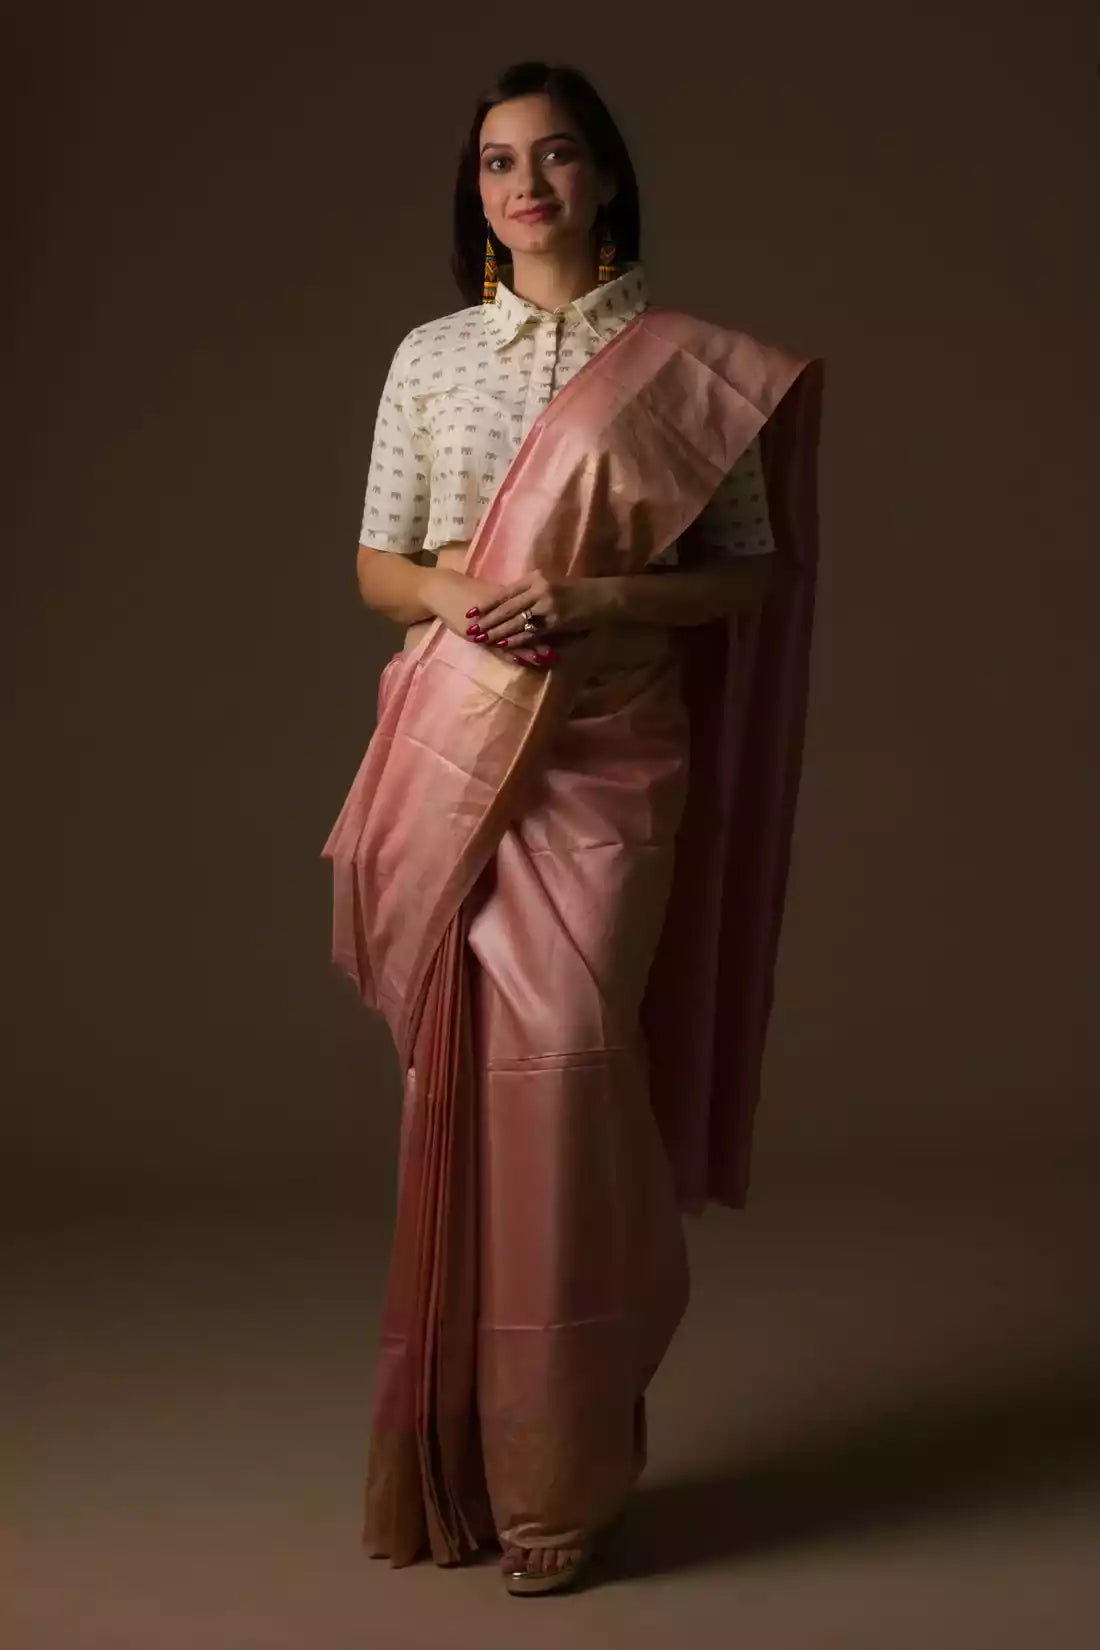 A beautiful lady in Dusty Rose Plain In Tussar Munga Saree, a office wear for women